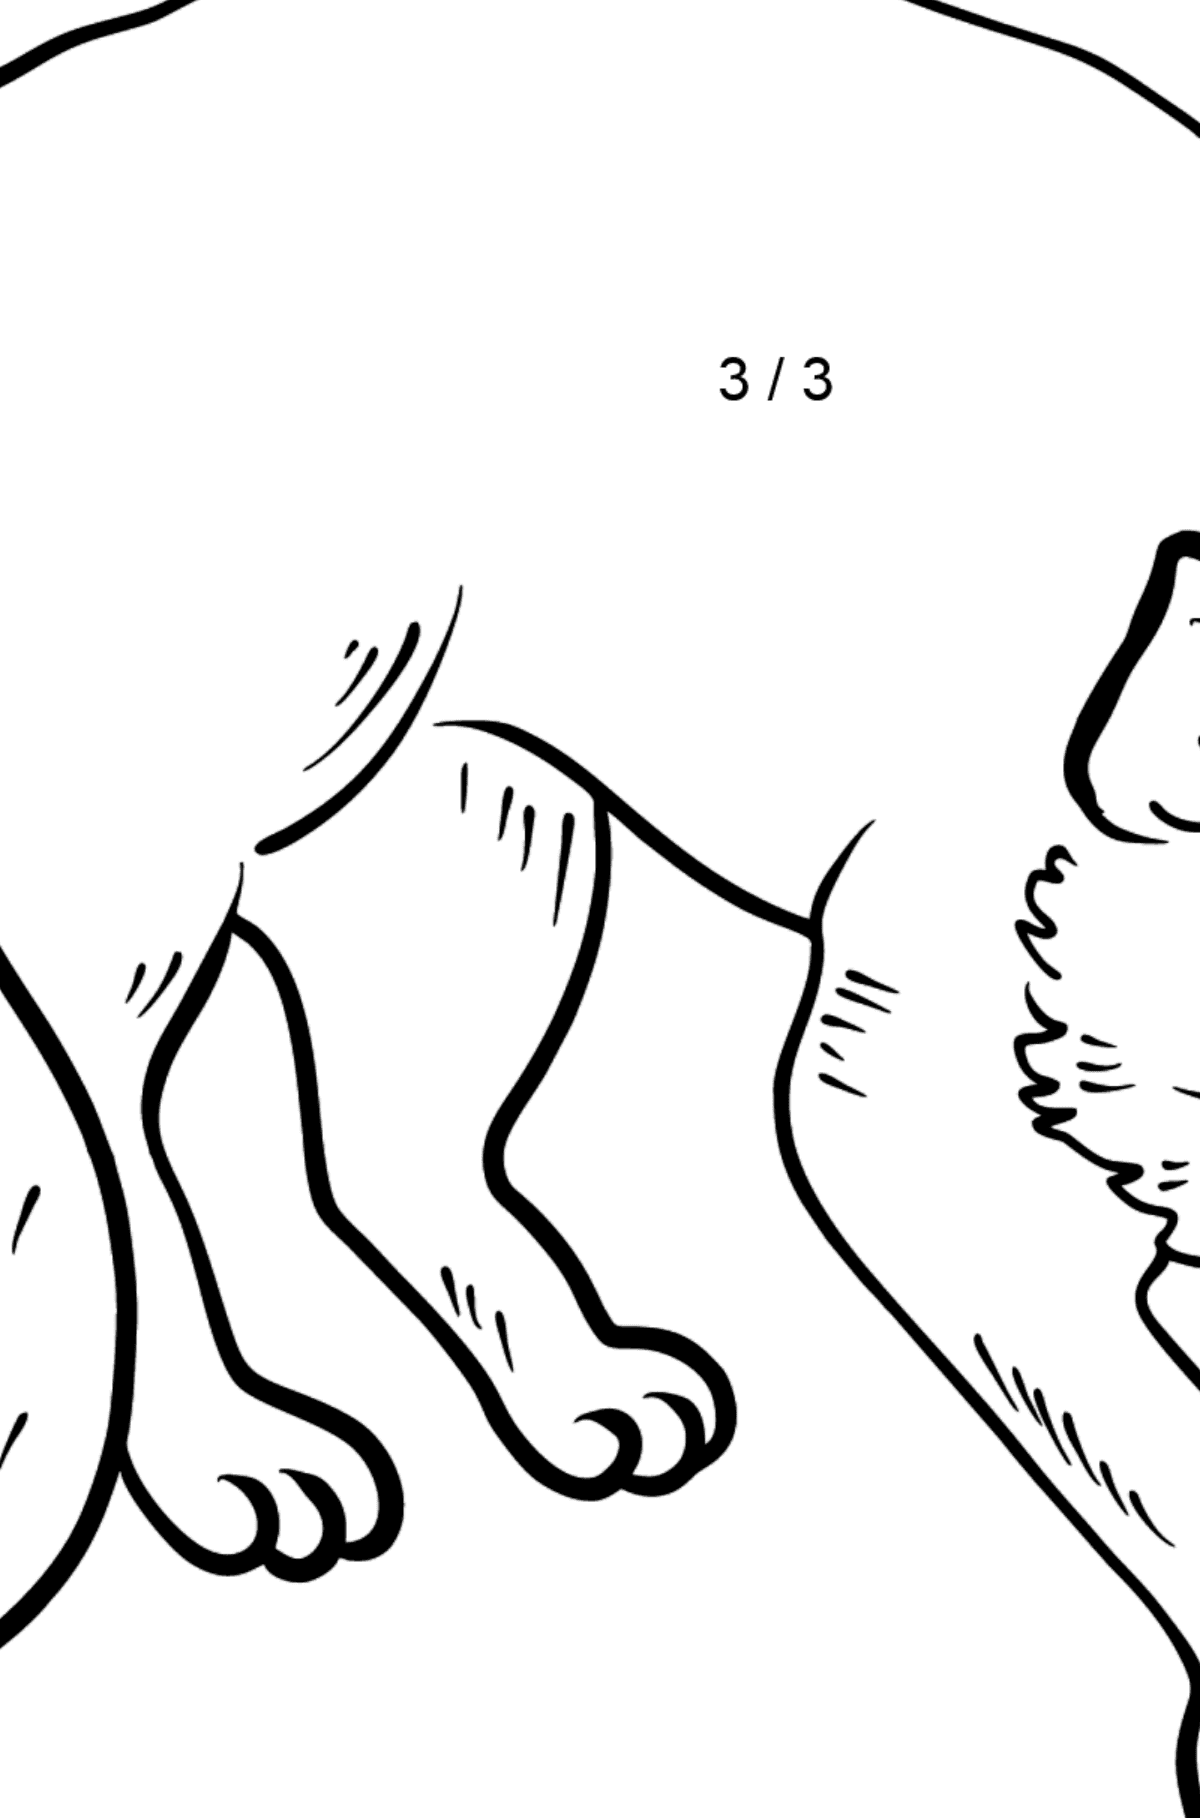 Fox coloring page - Math Coloring - Division for Kids